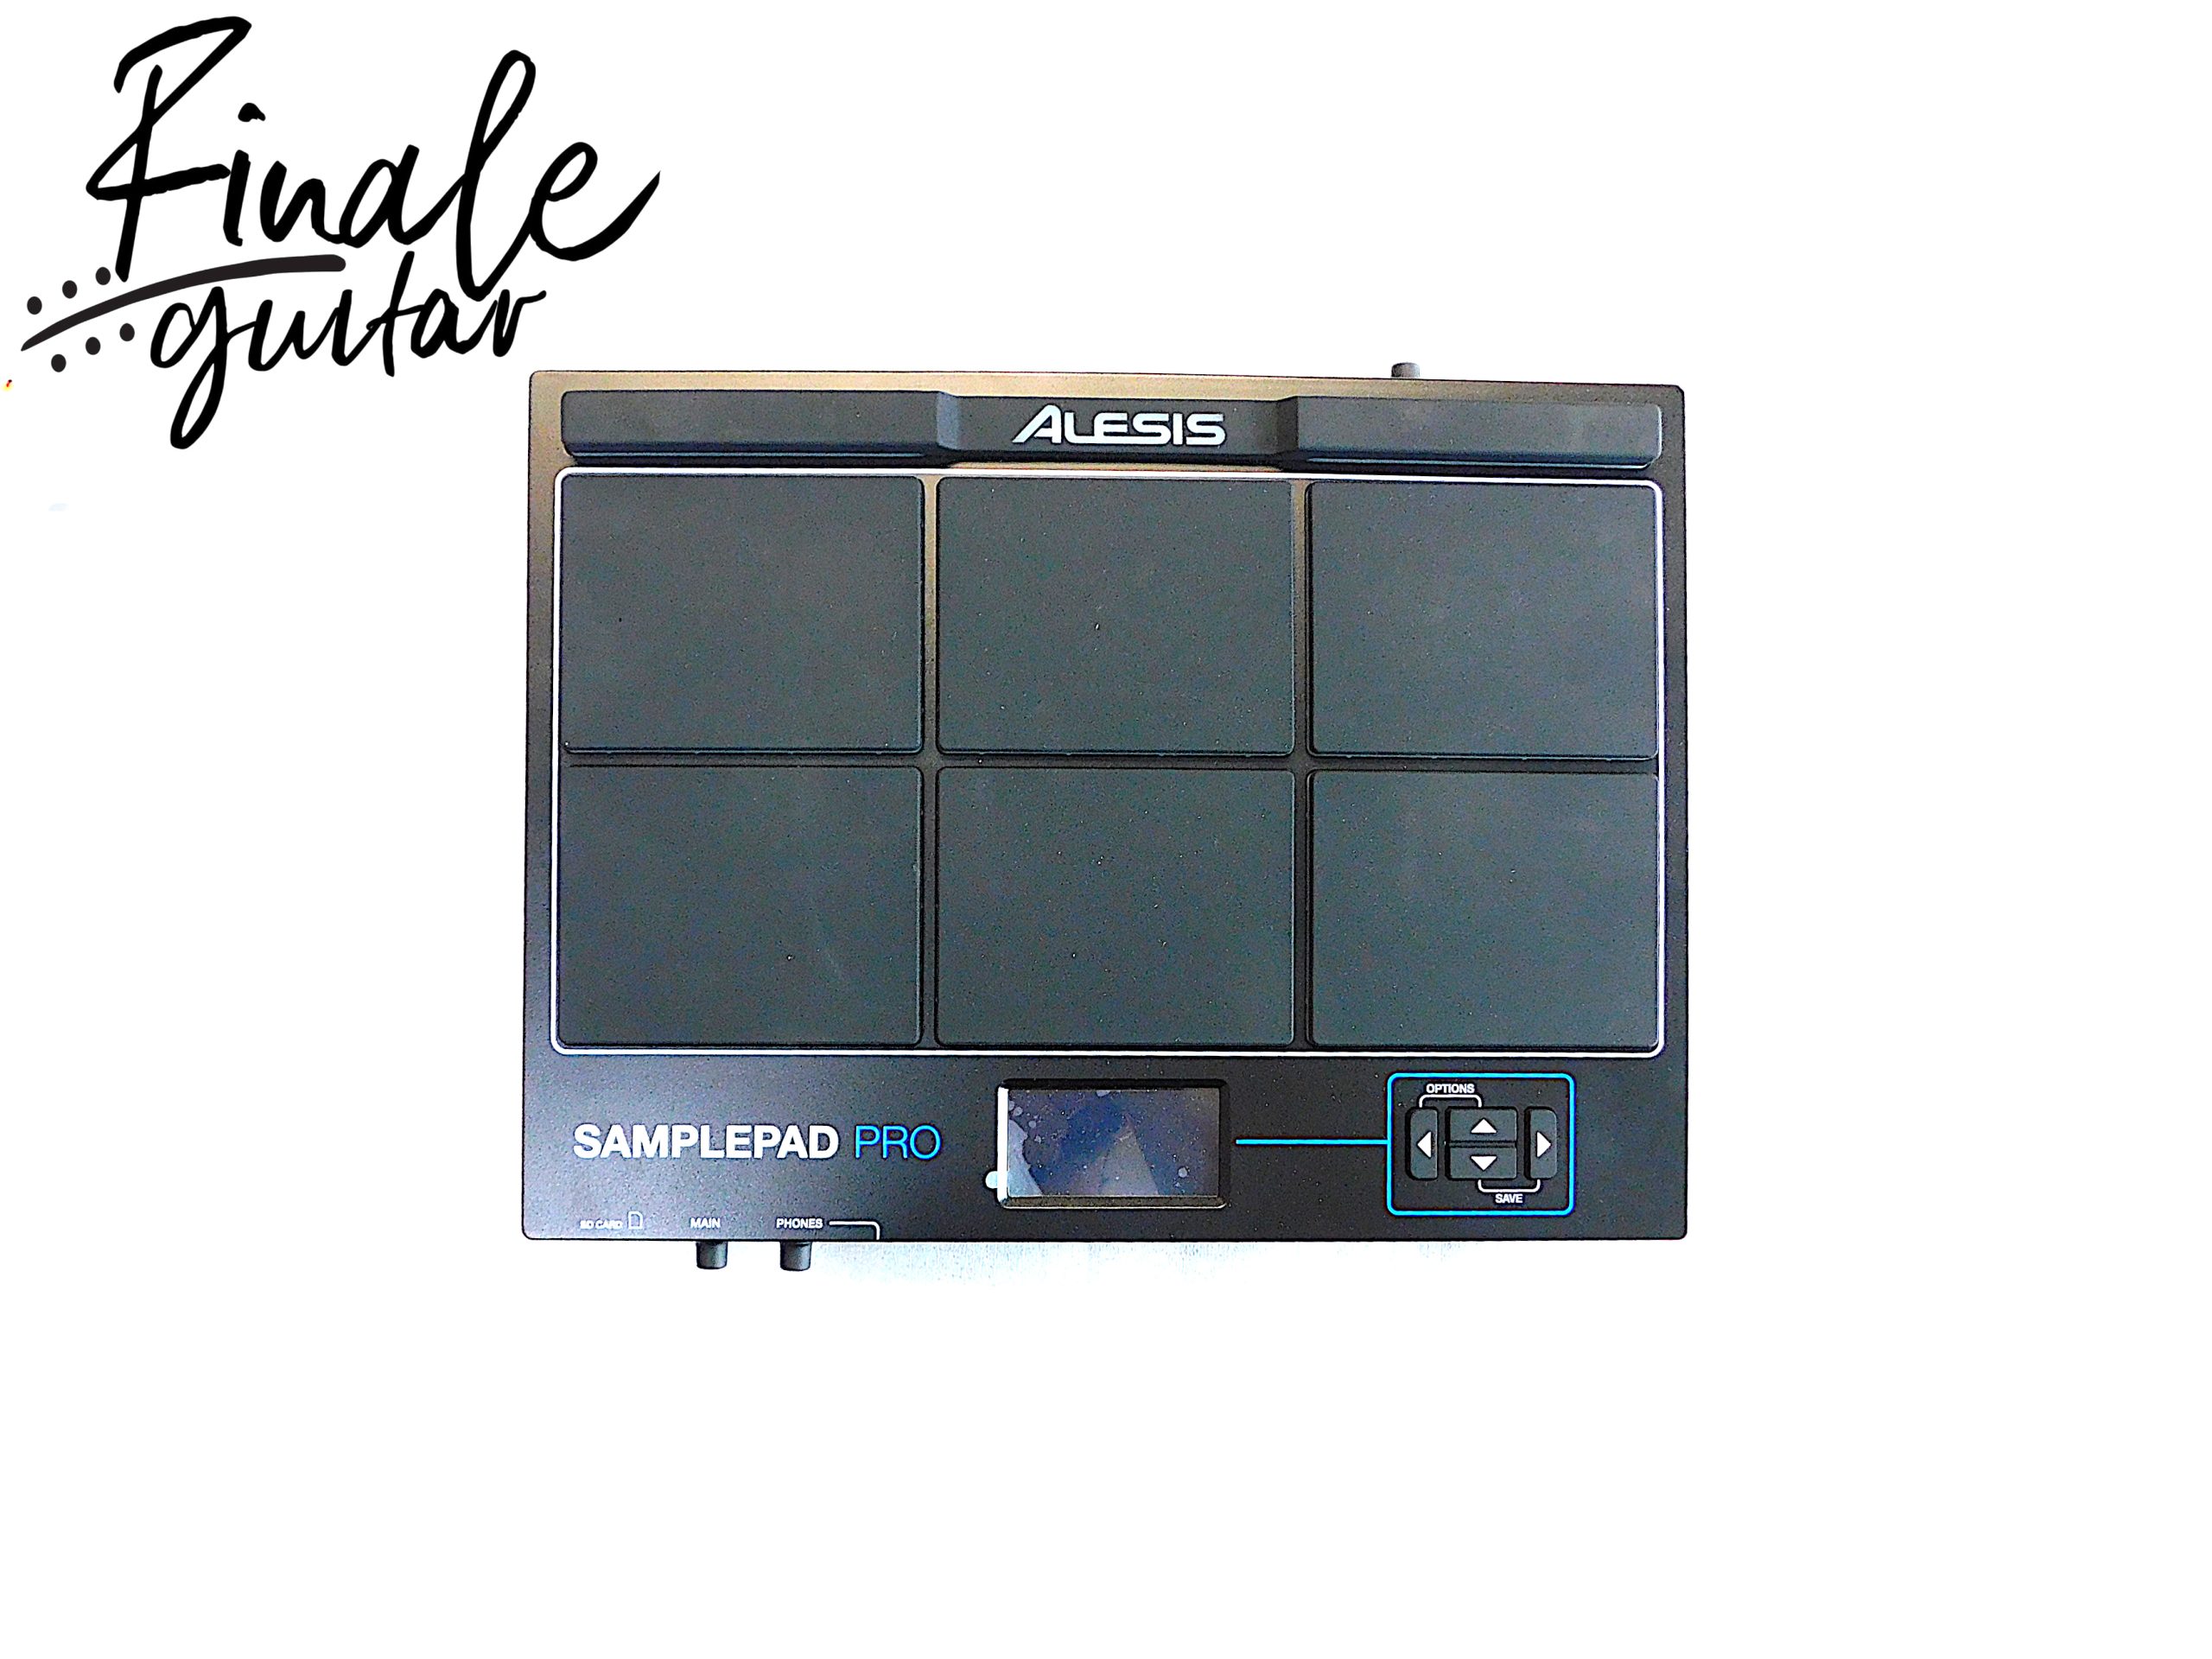 Alesis Sample Pad Pro for sale in our Sheffield guitar shop, Finale Guitar